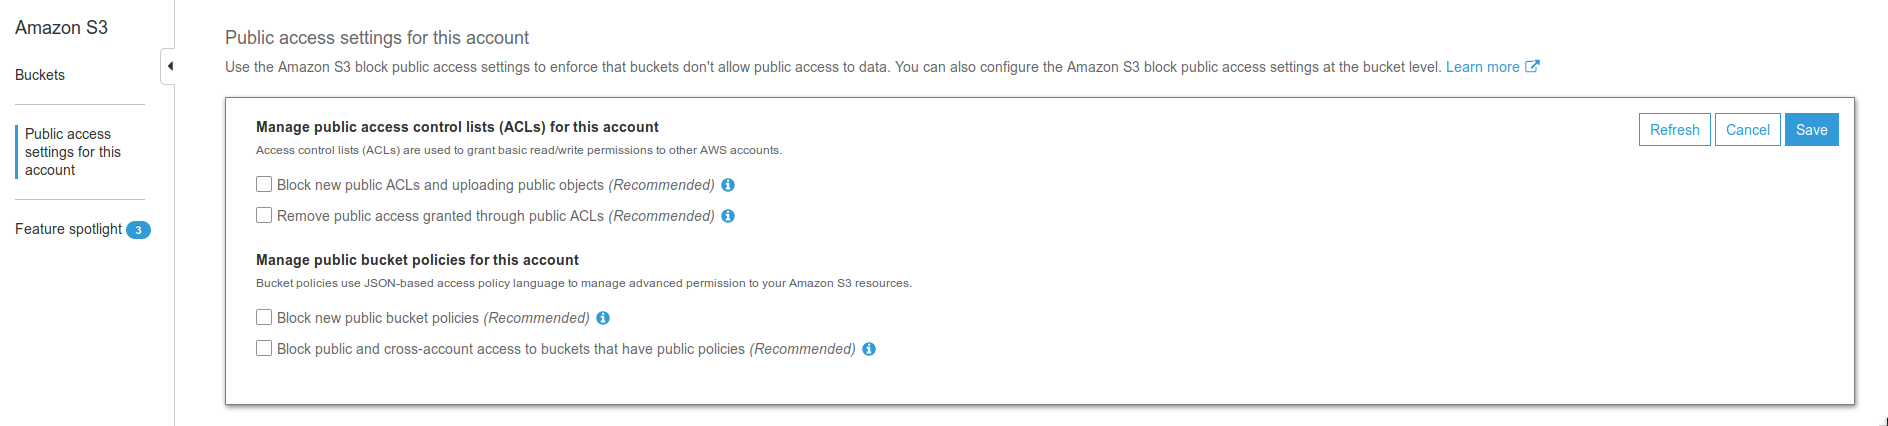 /media/aws/s3-public-access-settings-account.png